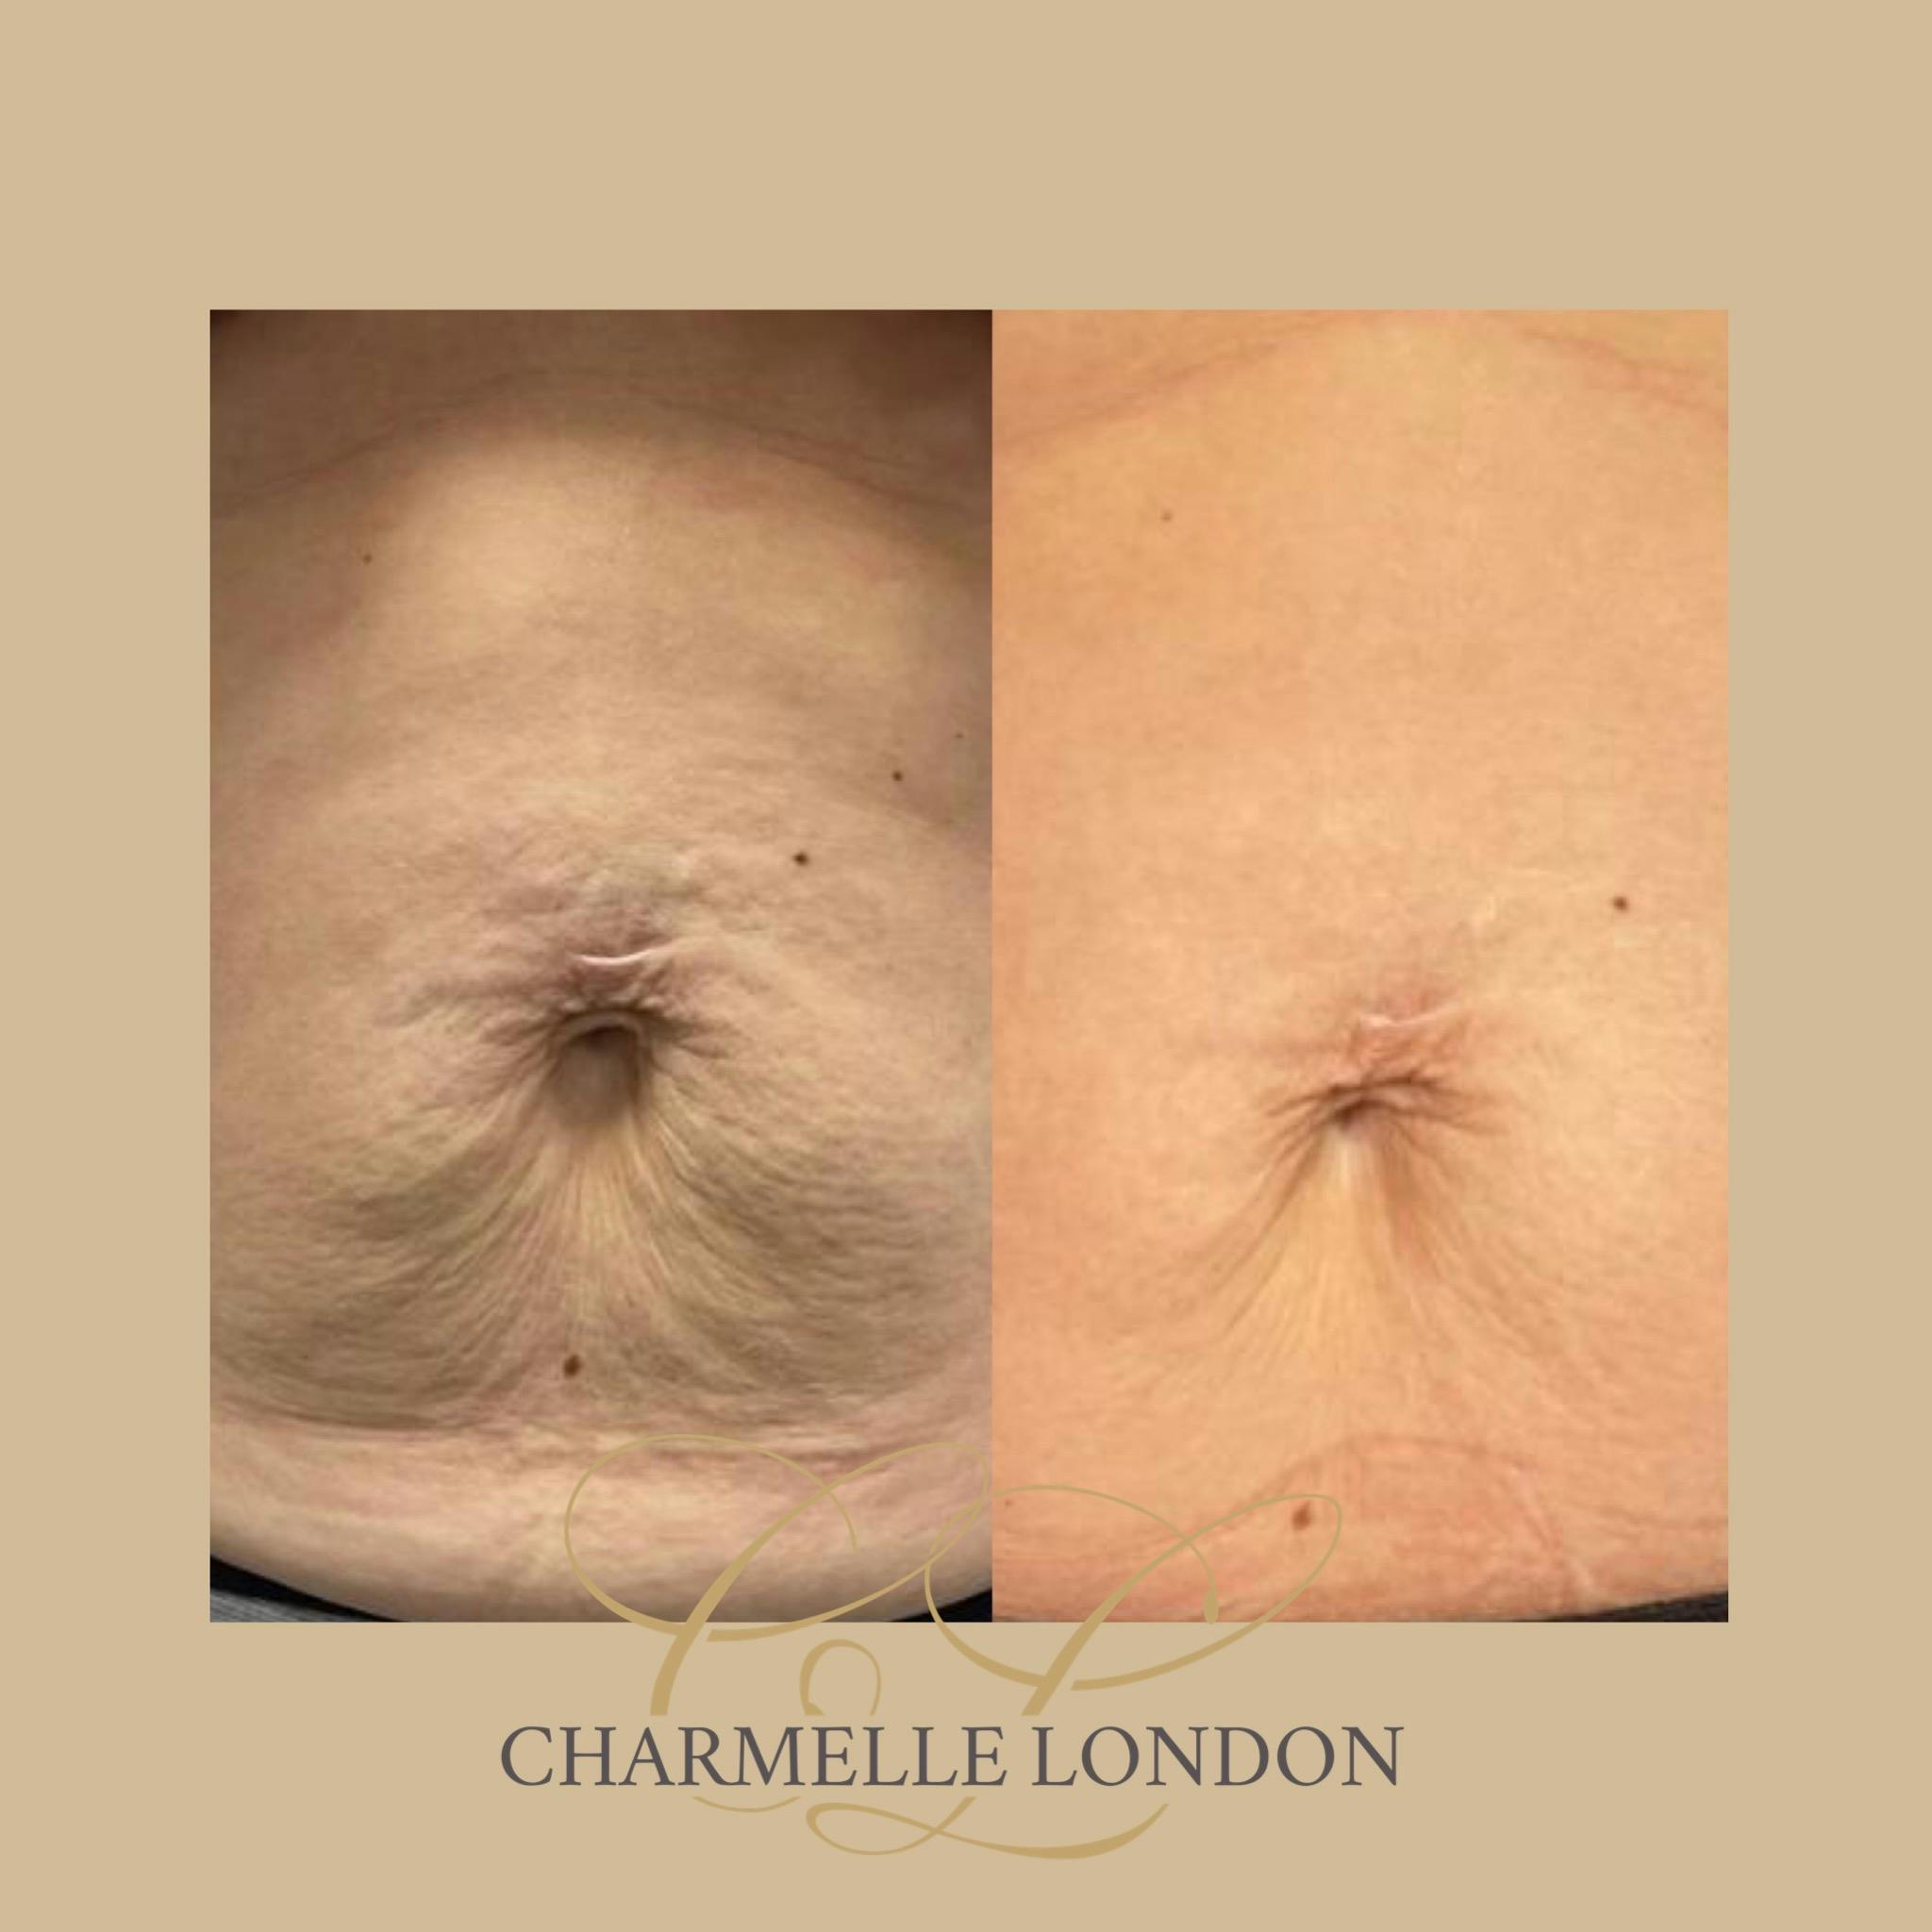 A revolutionary new non-surgical, cosmetic procedure that works completely with the body’s own natural regeneration process. It has a proven model of action, with good clinical outcomes and safety profile, resulting in brighter, healthier, more youthful-looking skin.